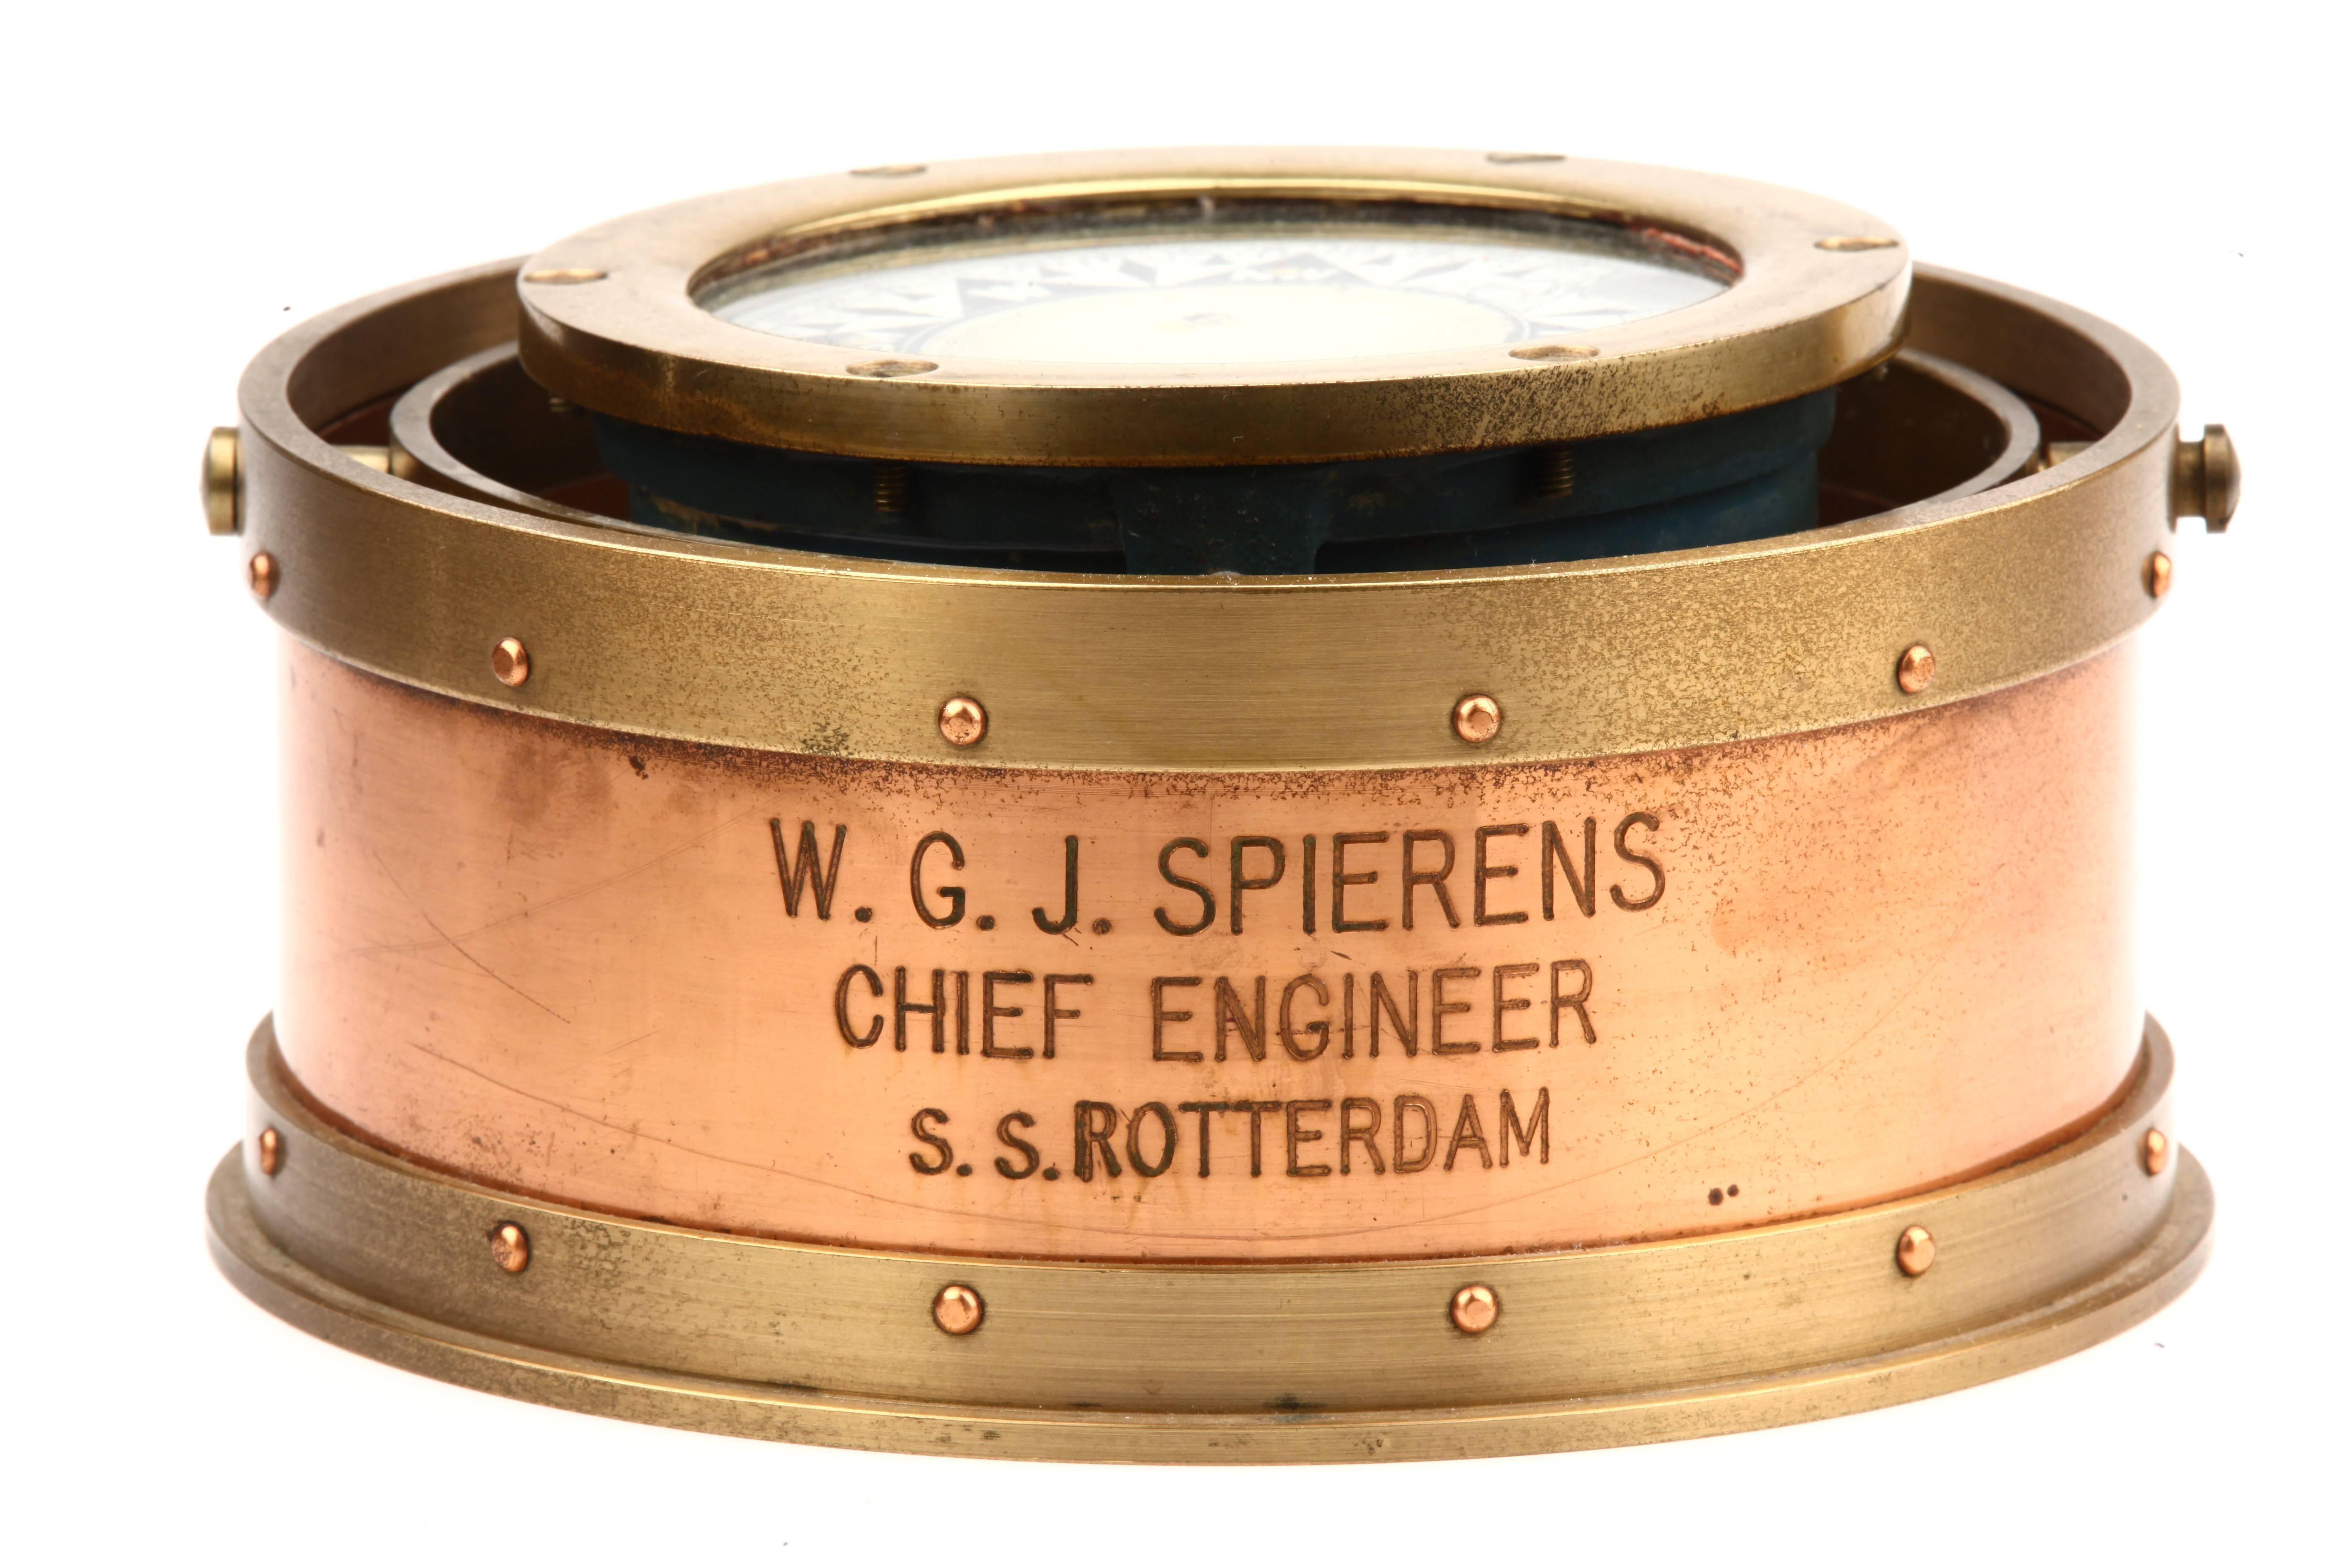 E. Esdaile & Sons Sydney Nautical Brass Compass made for Chief Engineer from SS Rotterdam.

History SS Rotterdam:

The SS Rotterdam is the 'Grande Dame' of Rotterdam. It is the biggest passenger ship ever built on Dutch soil and stands testimony